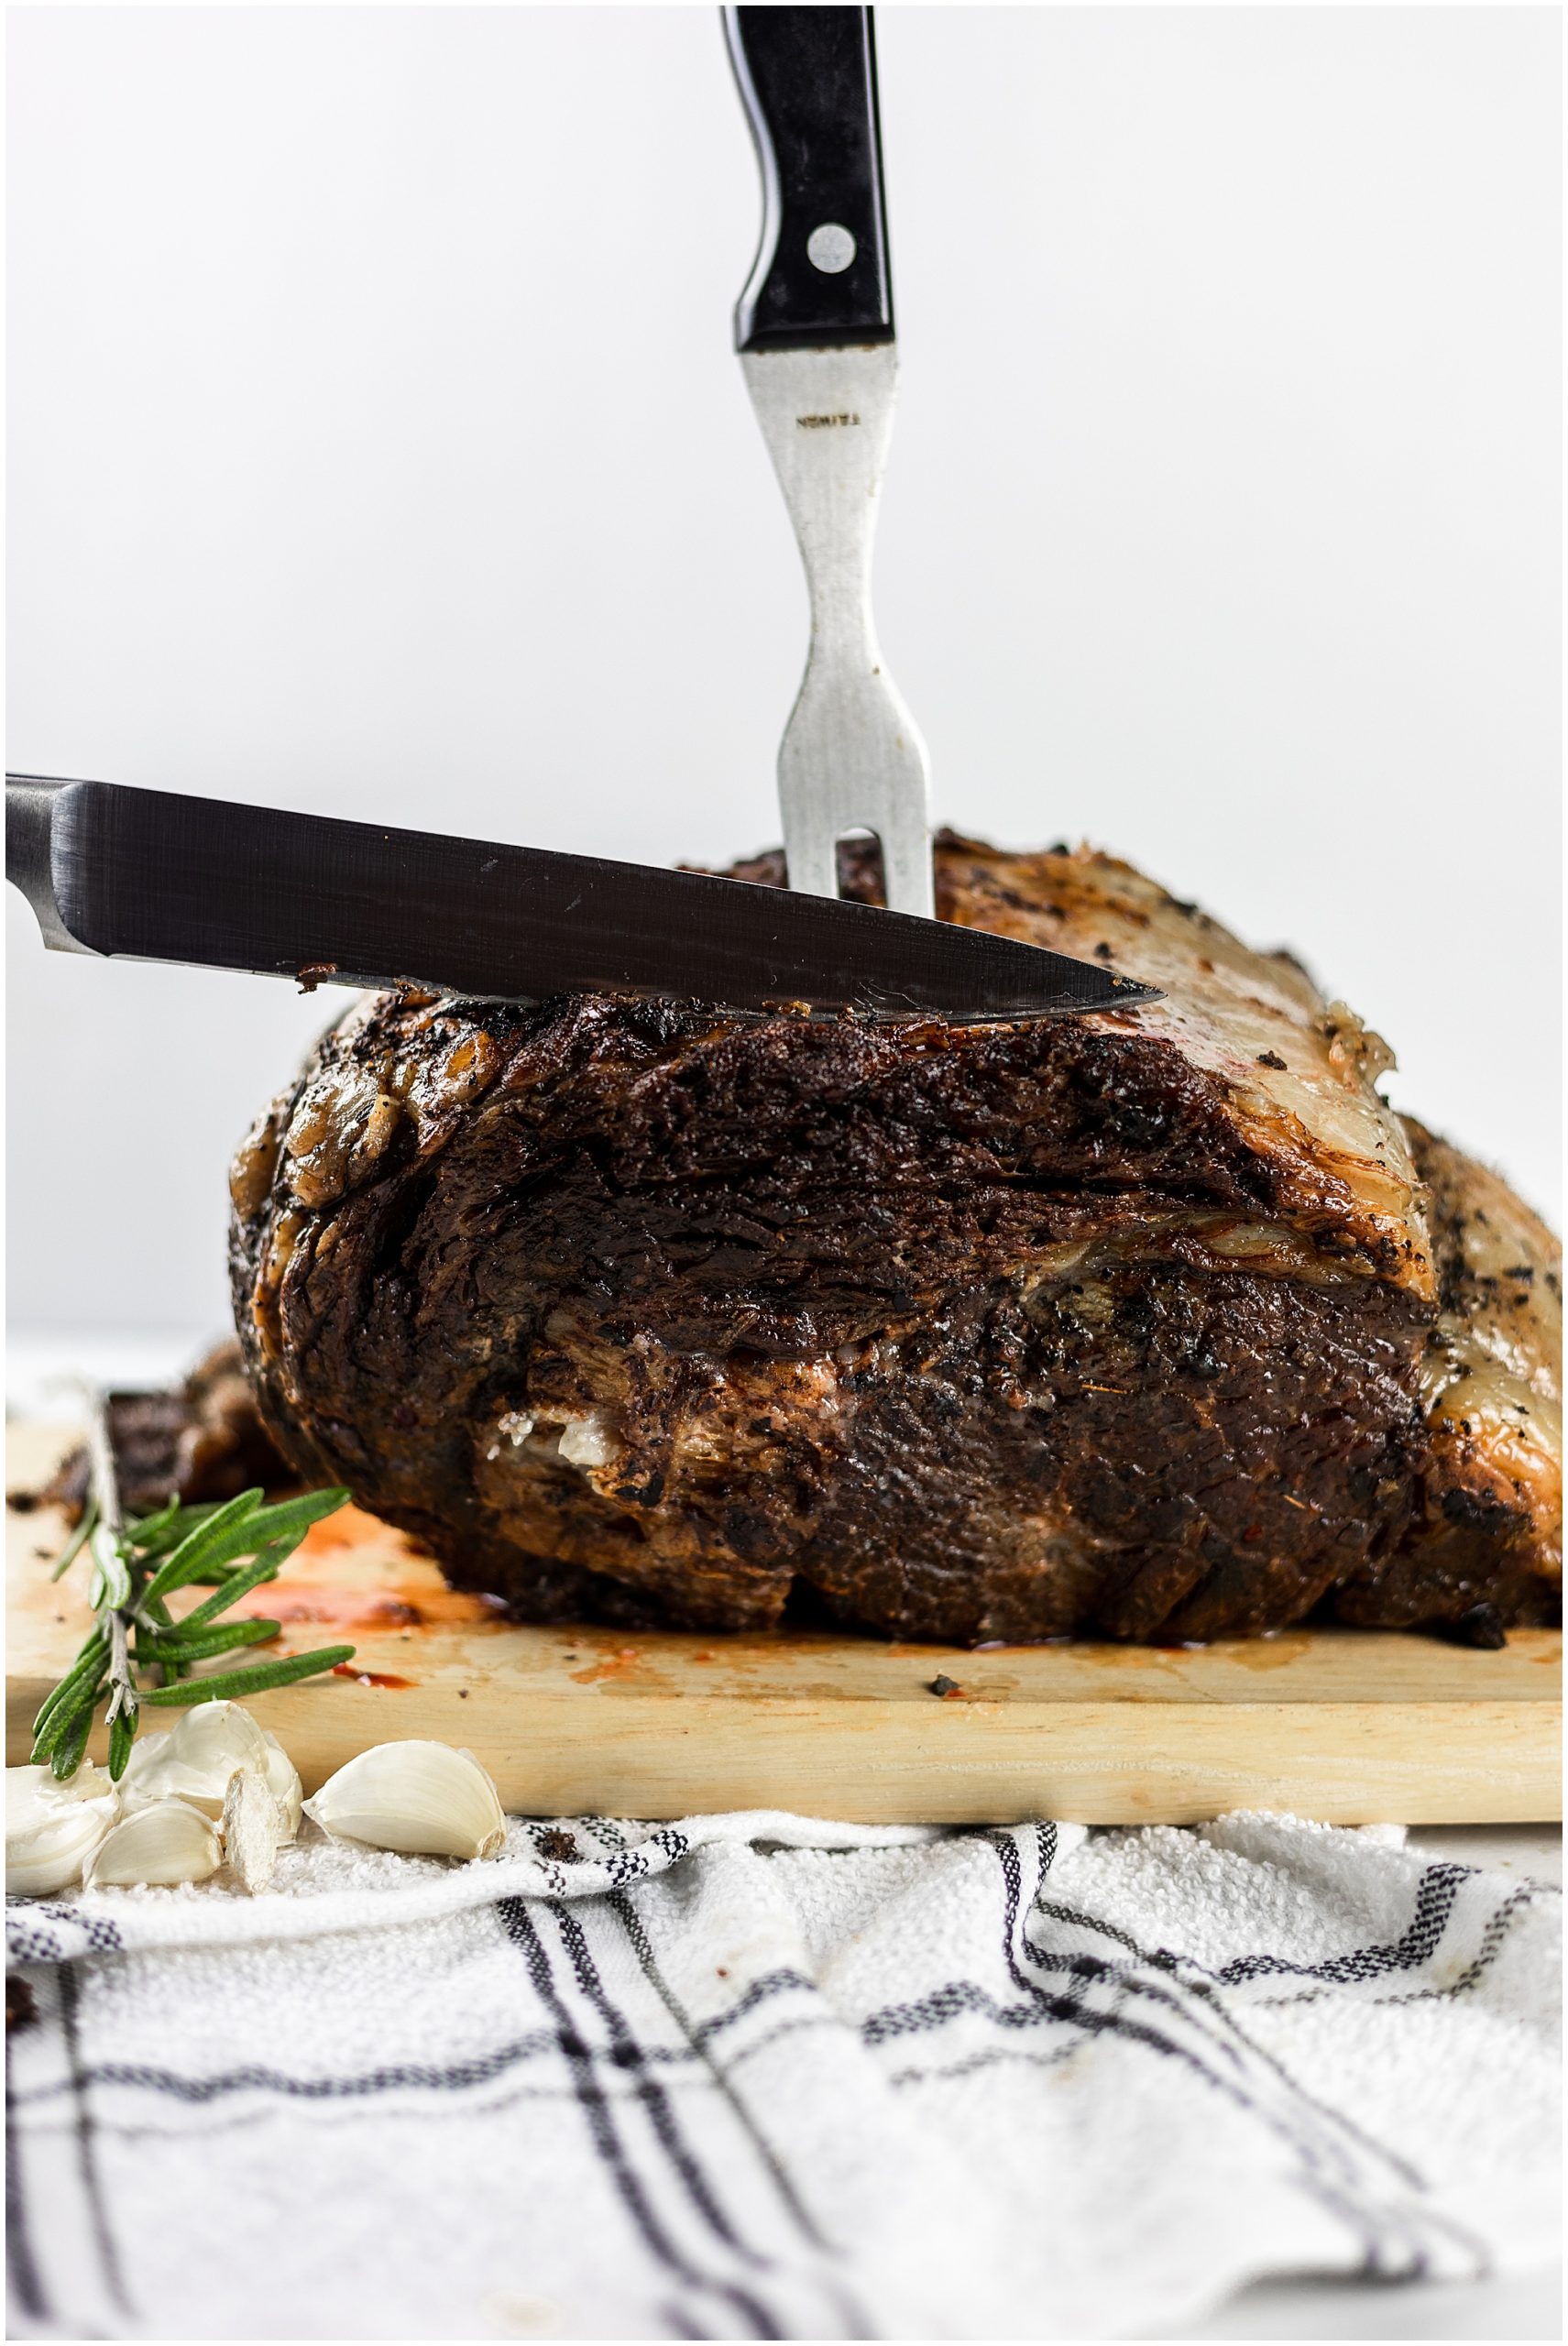 Prime rib with garlic herb butter